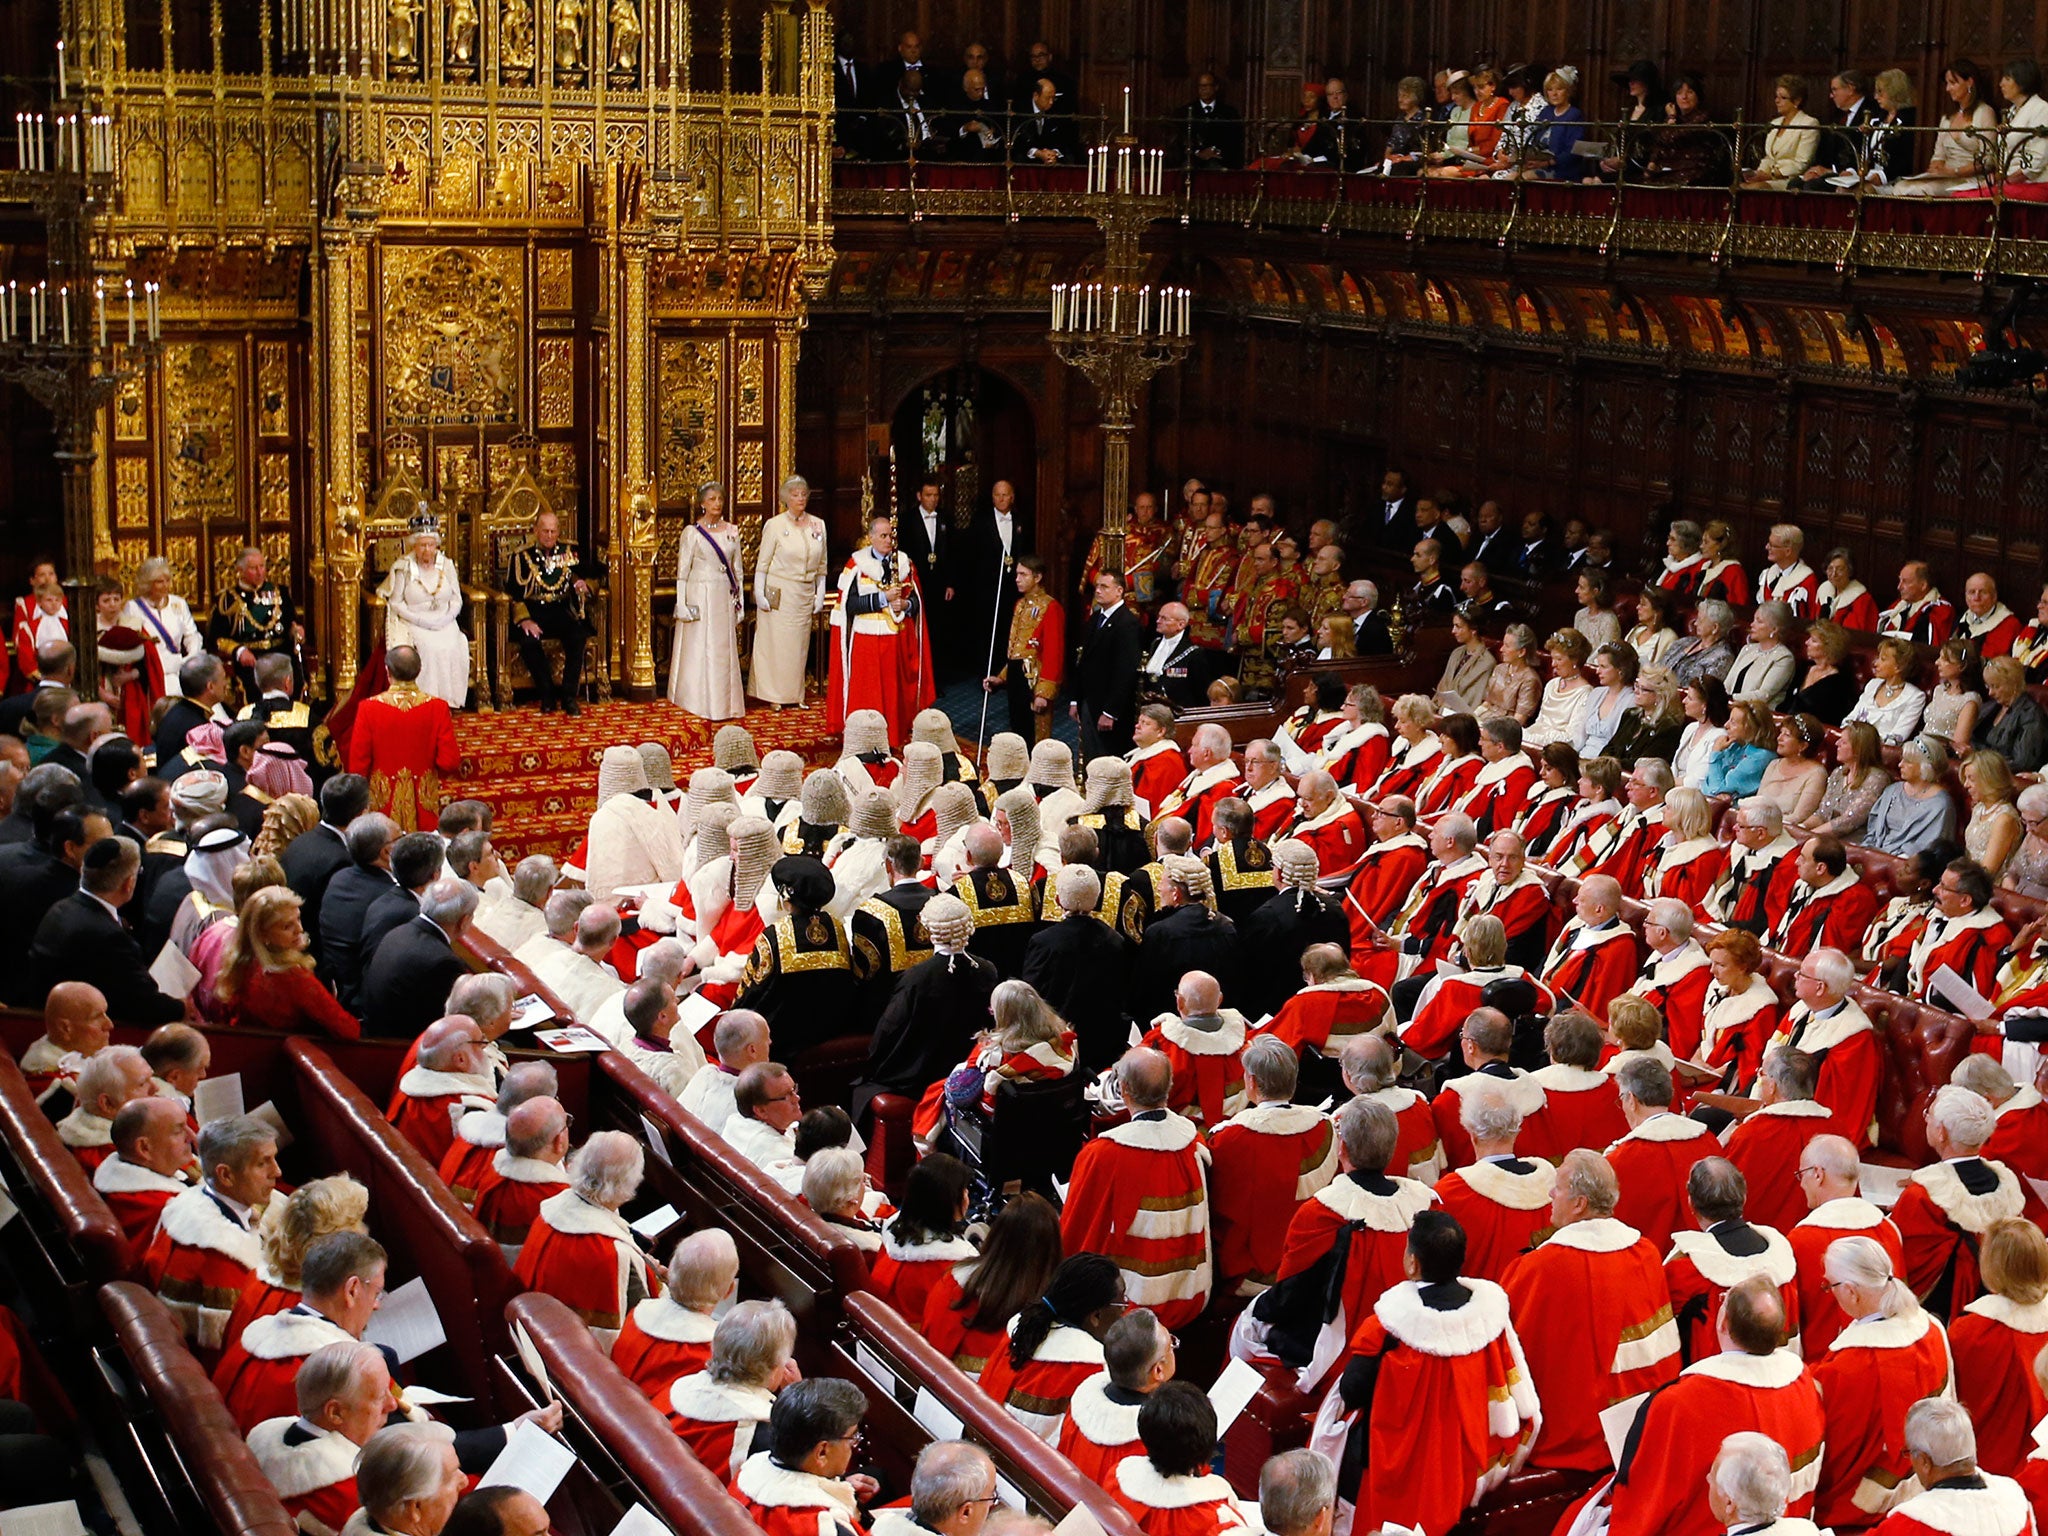 The House of Lords is in many ways an anachronism